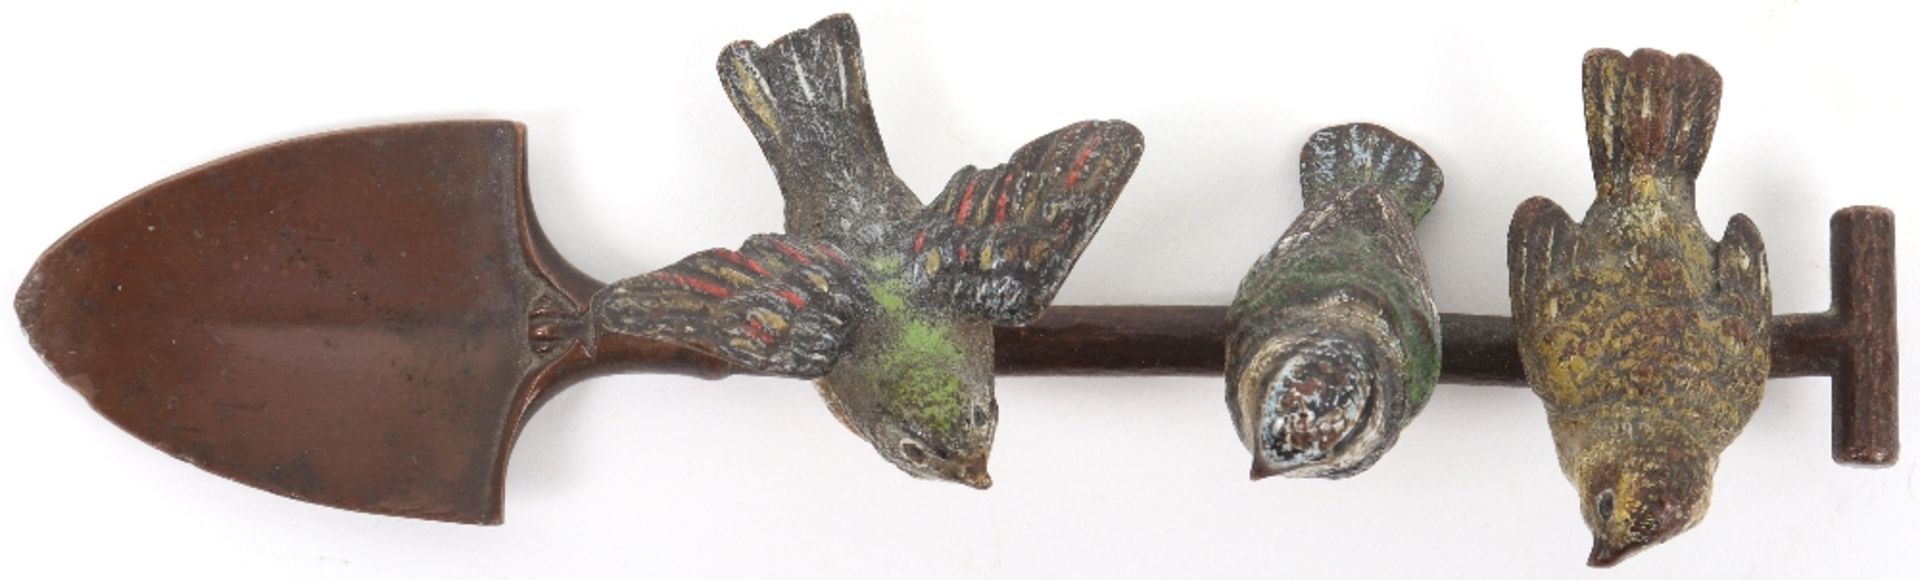 A 19th century cold painted bronze group of three birds sat atop a shovel, Austrian - Image 2 of 5